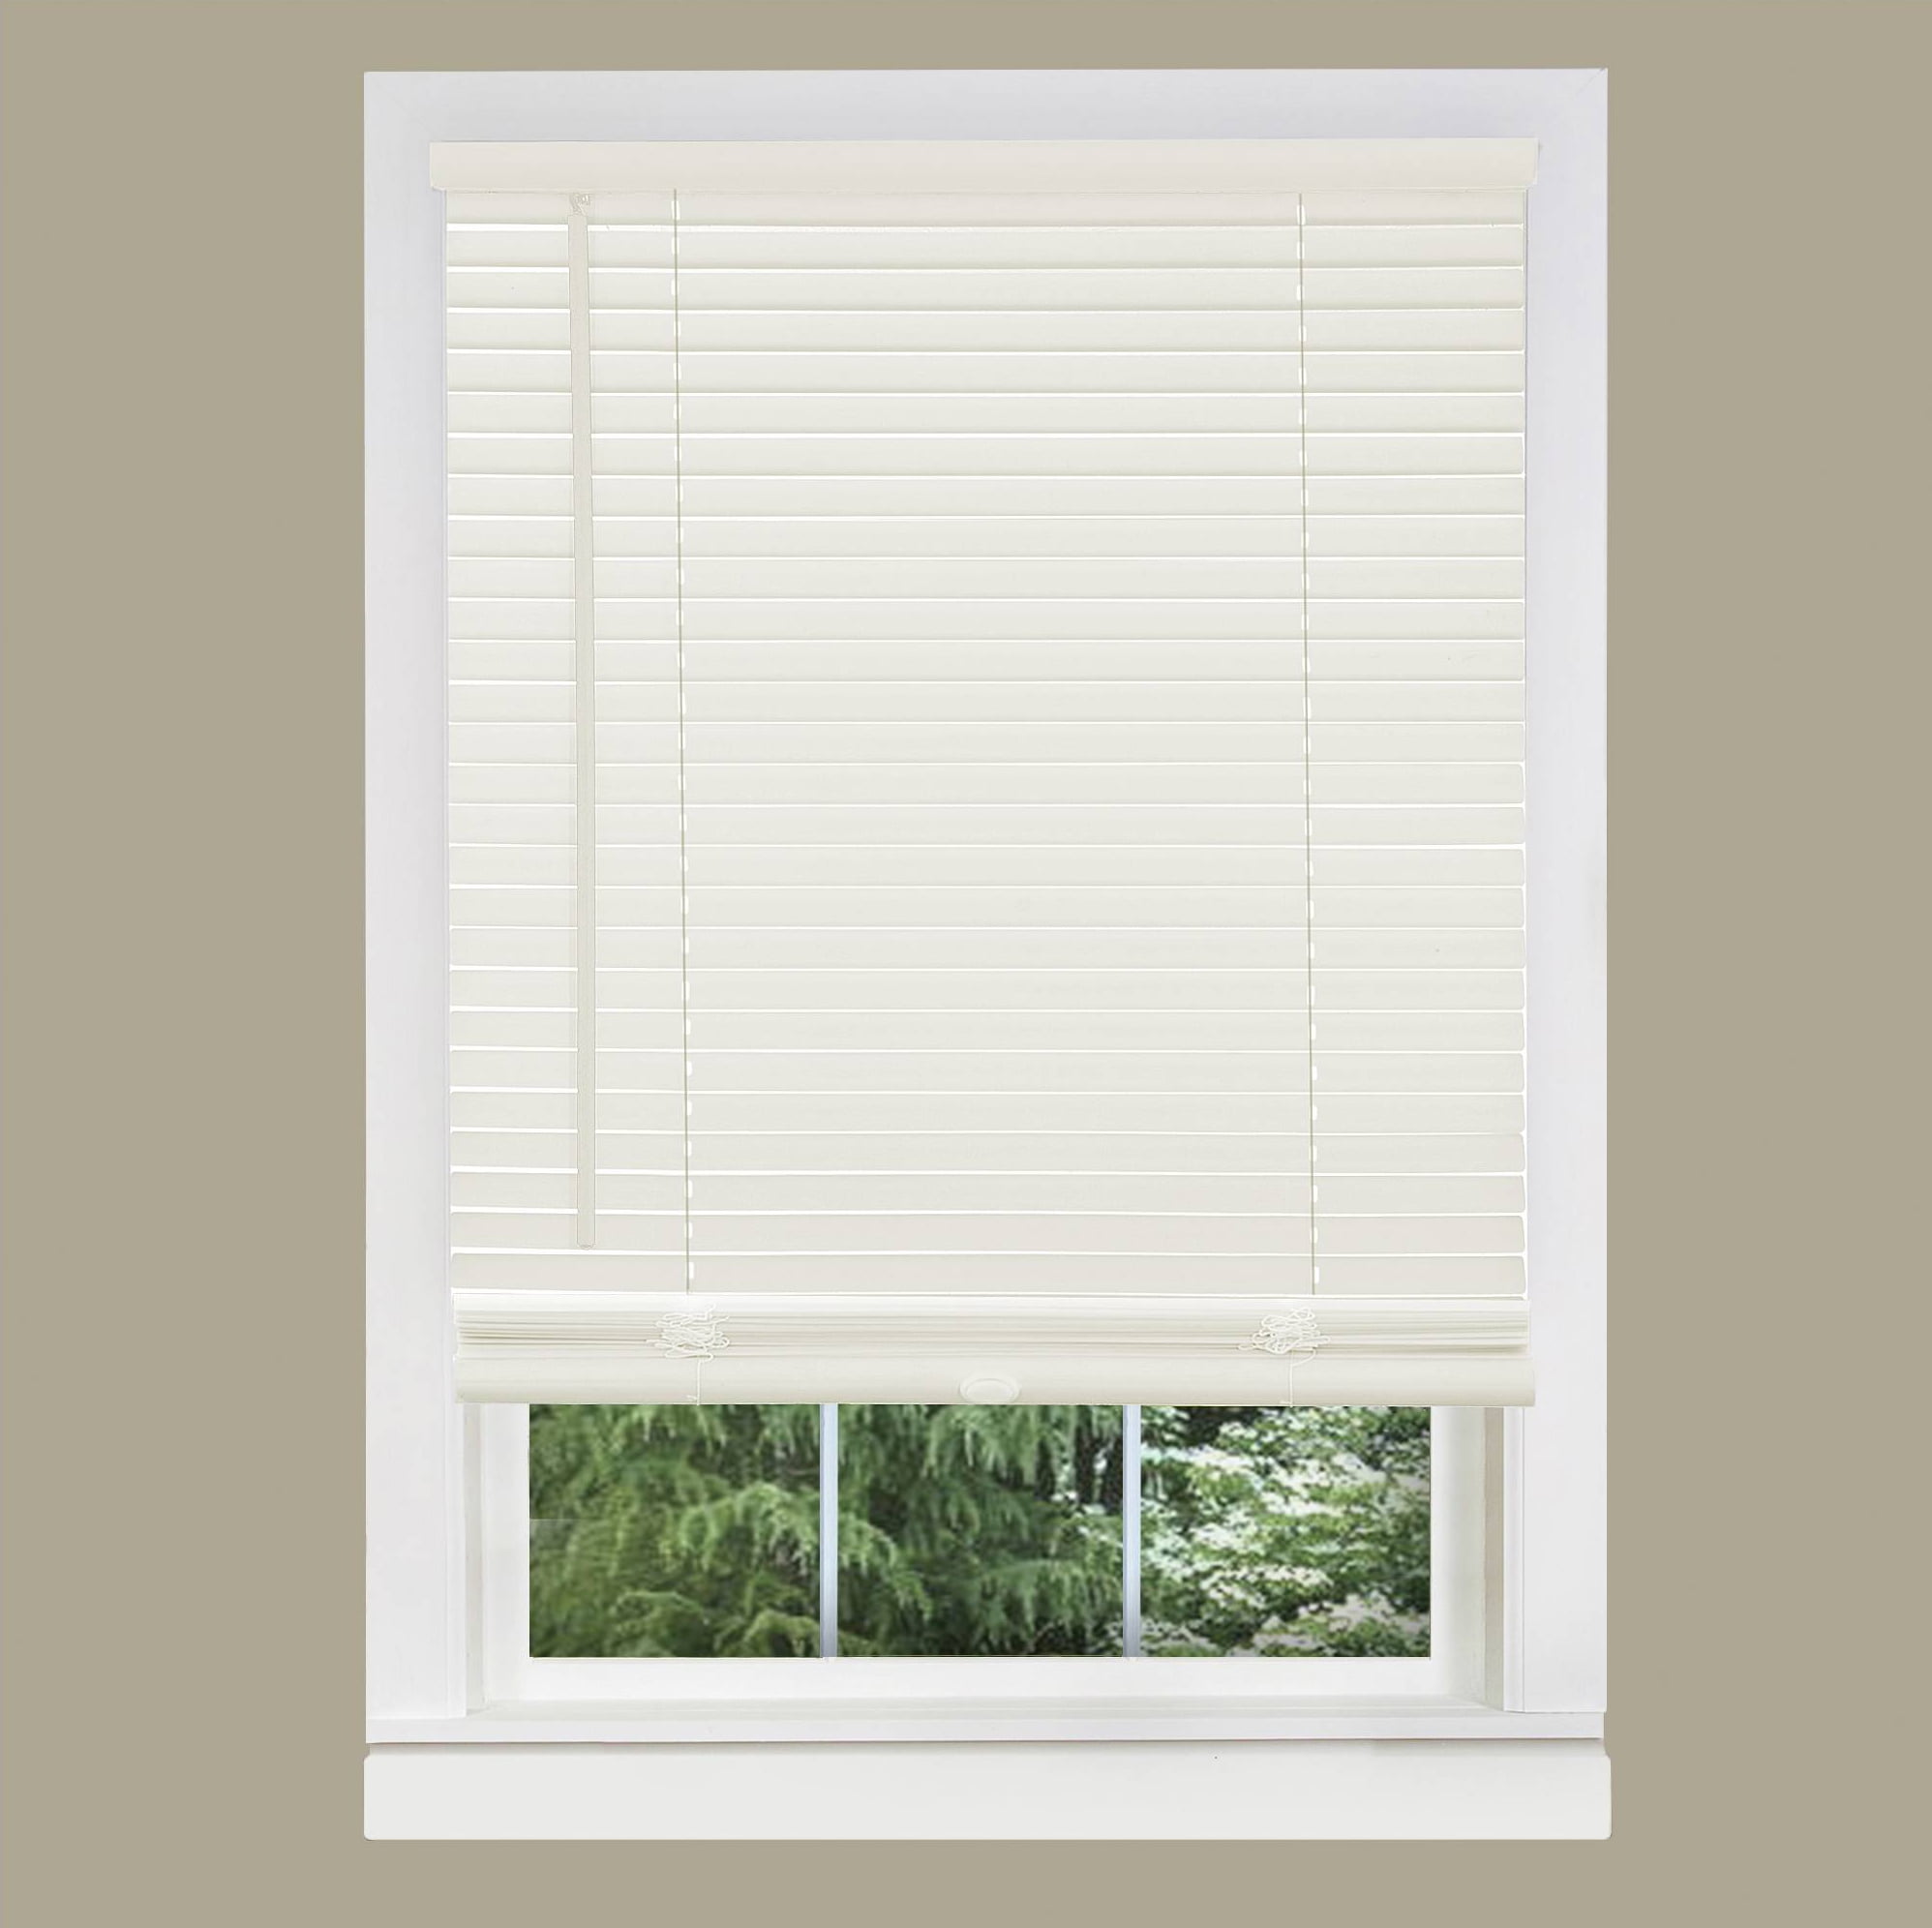 Details about   1 in Vinyl Mini Blind Cordless Window Blinds Shade Washable White/Alabaster 